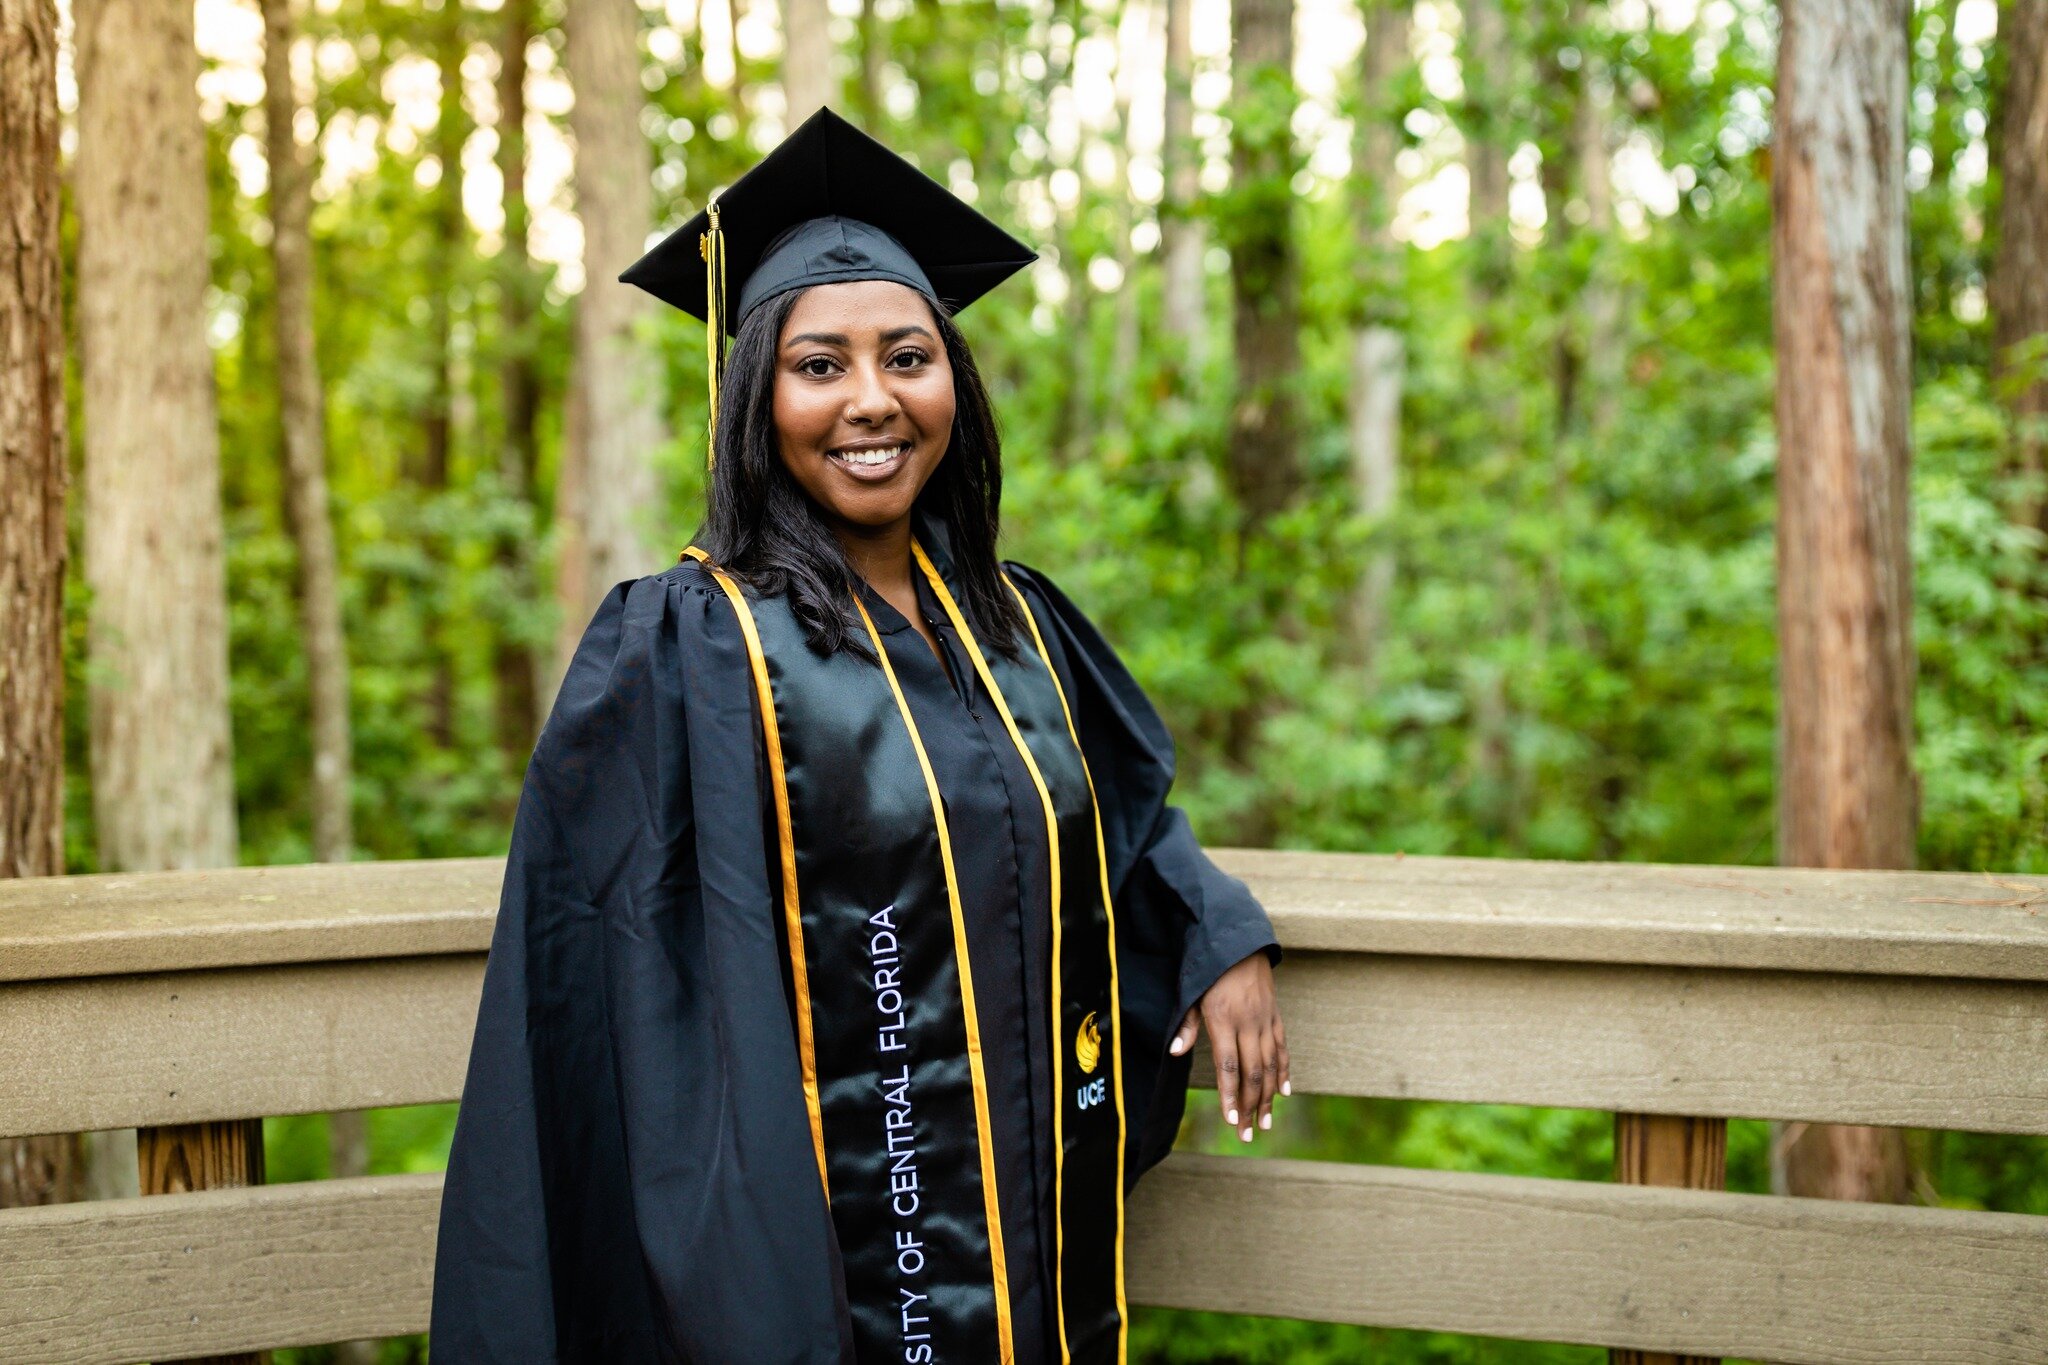 Seniors! Grads! Now is the time to get on the schedule if you haven't. Documenting these times is so important. Whether you're graduating from UCF or preschool, dress up and celebrate your accomplishment. 

It's going to be summer before we know it. 